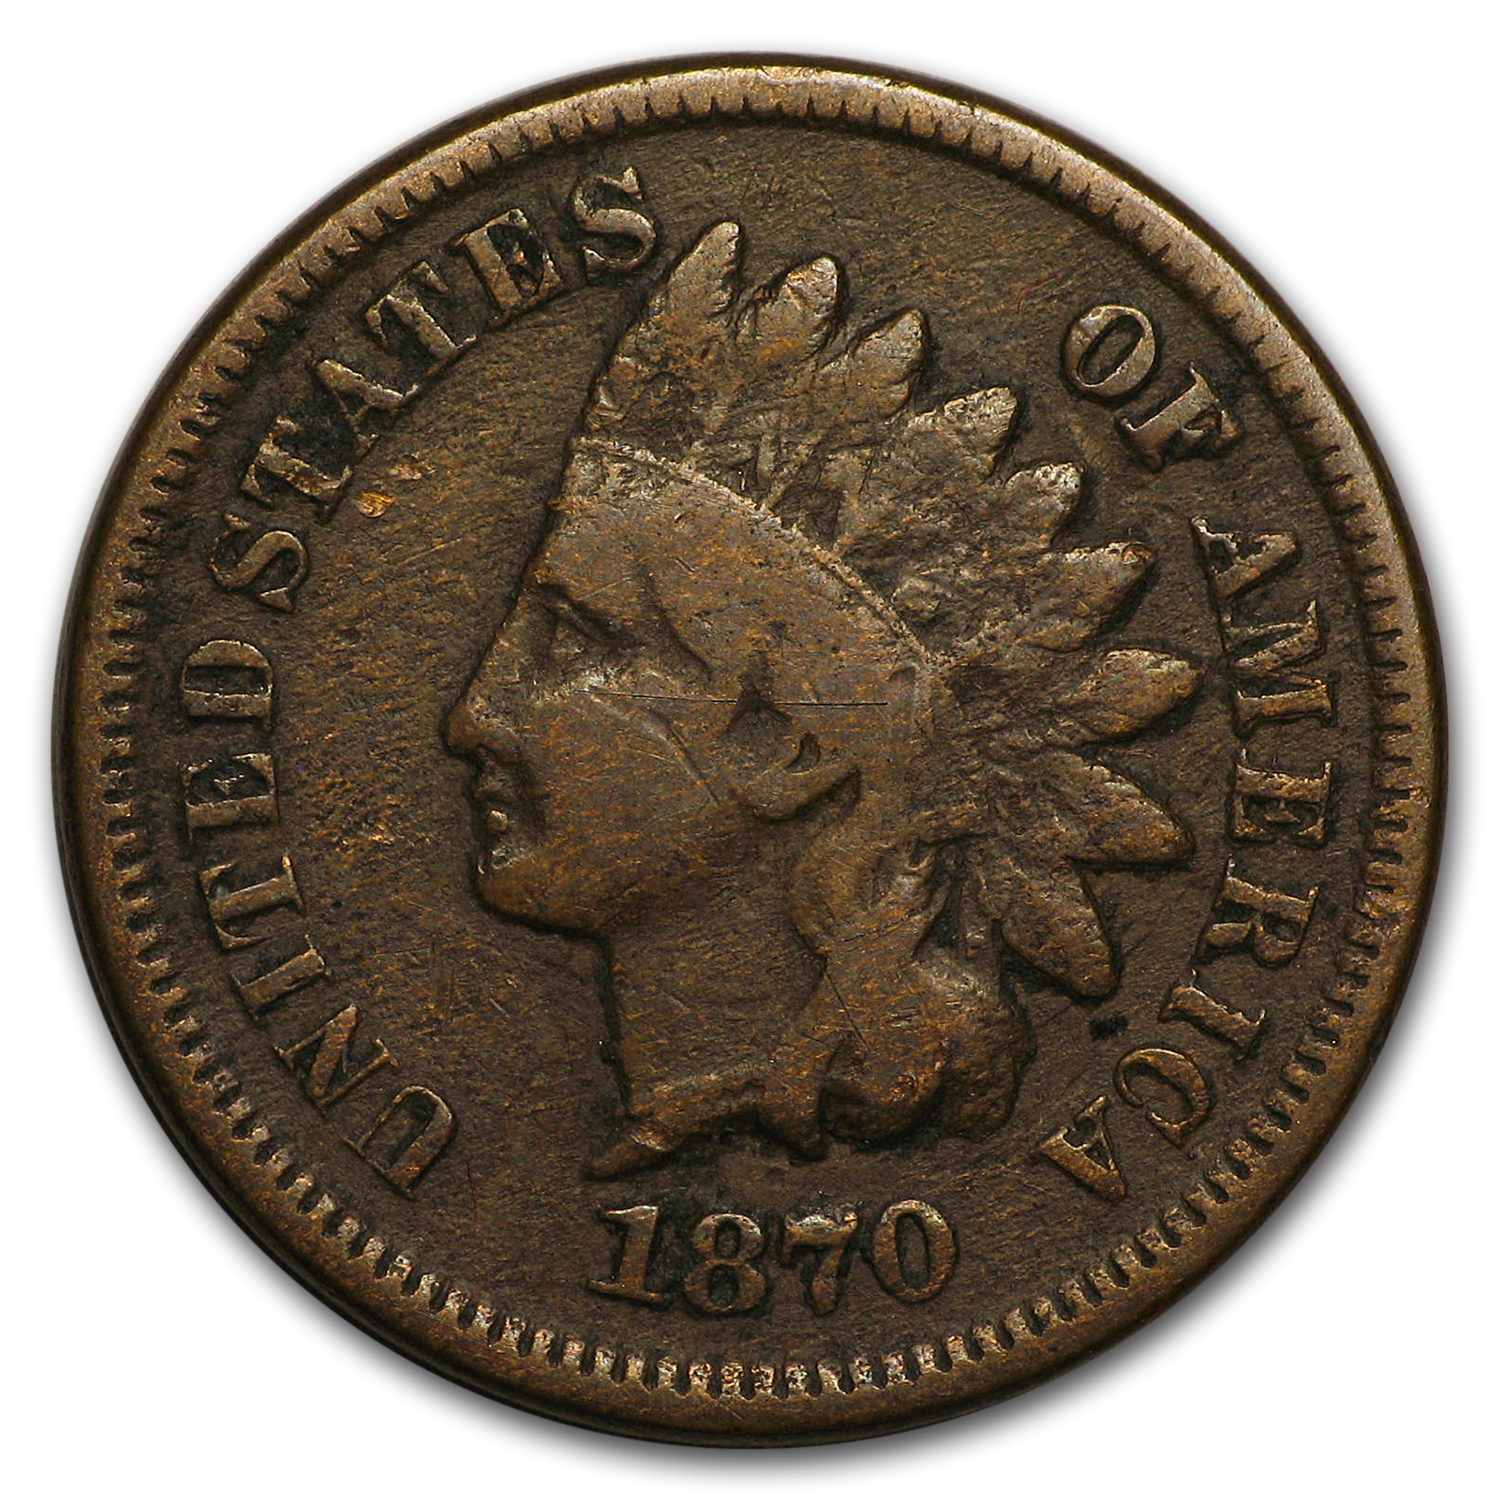 Buy 1870 Indian Head Cent VG